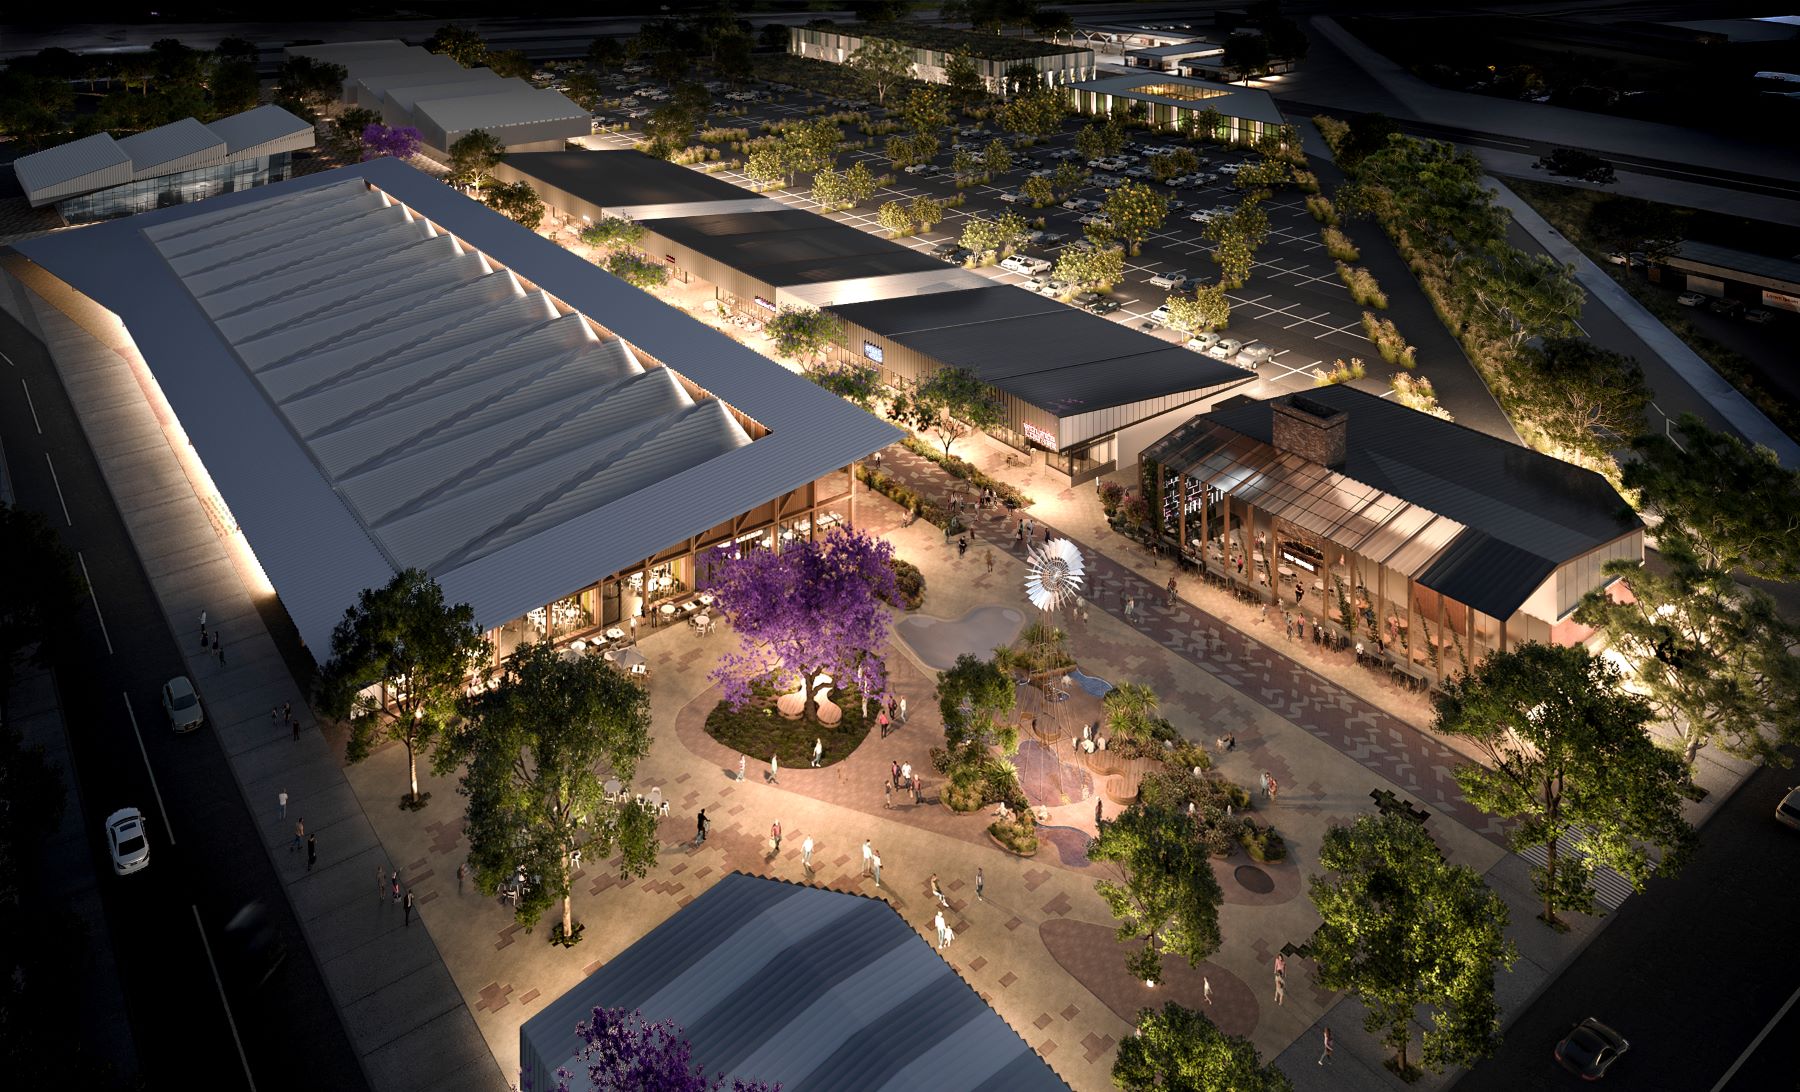 Artist impression of the future Two Wells Town centre viewed from above at night. Landscaped open spaces sit amongst rectangular, country-style buildings accessed by wide footpaths at the front.